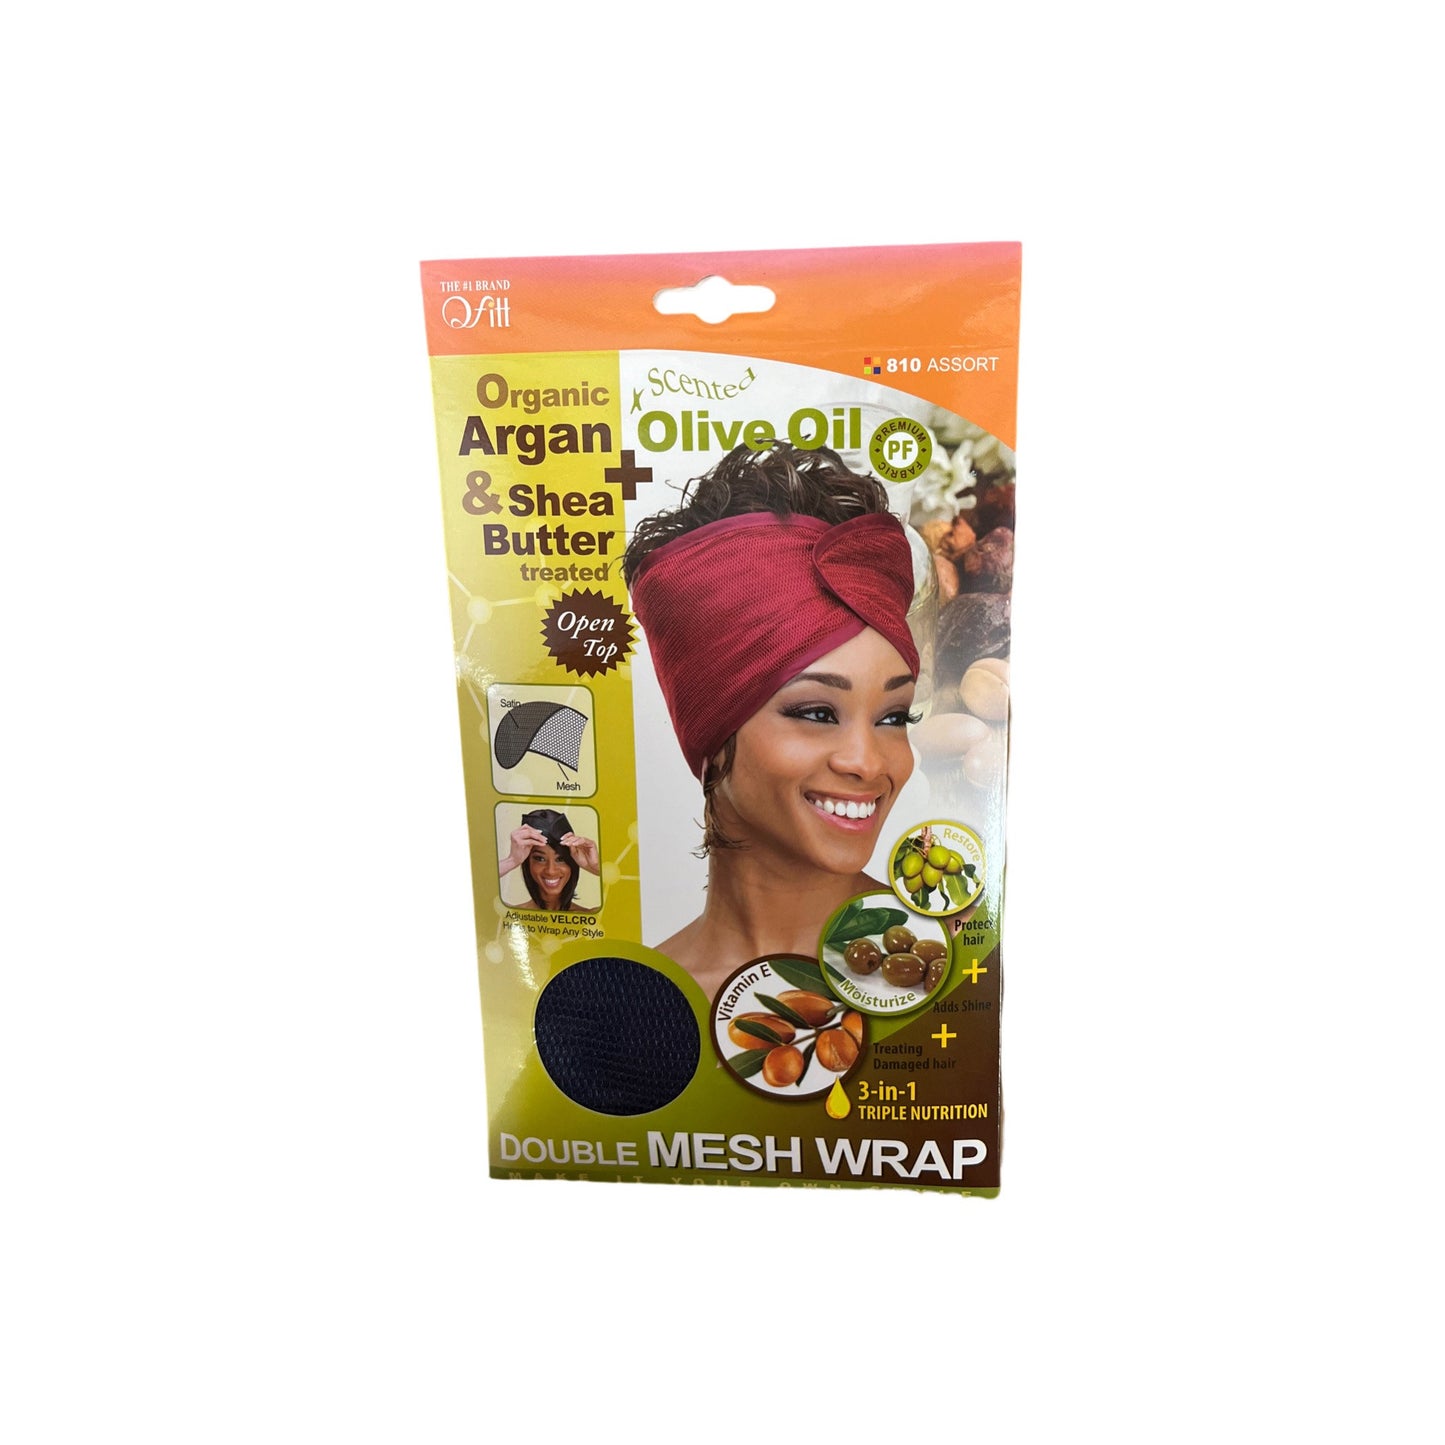 Qfitt Argan Olive Oil Shea Butter Double Mesh Wrap Adjustable |Available in many colors